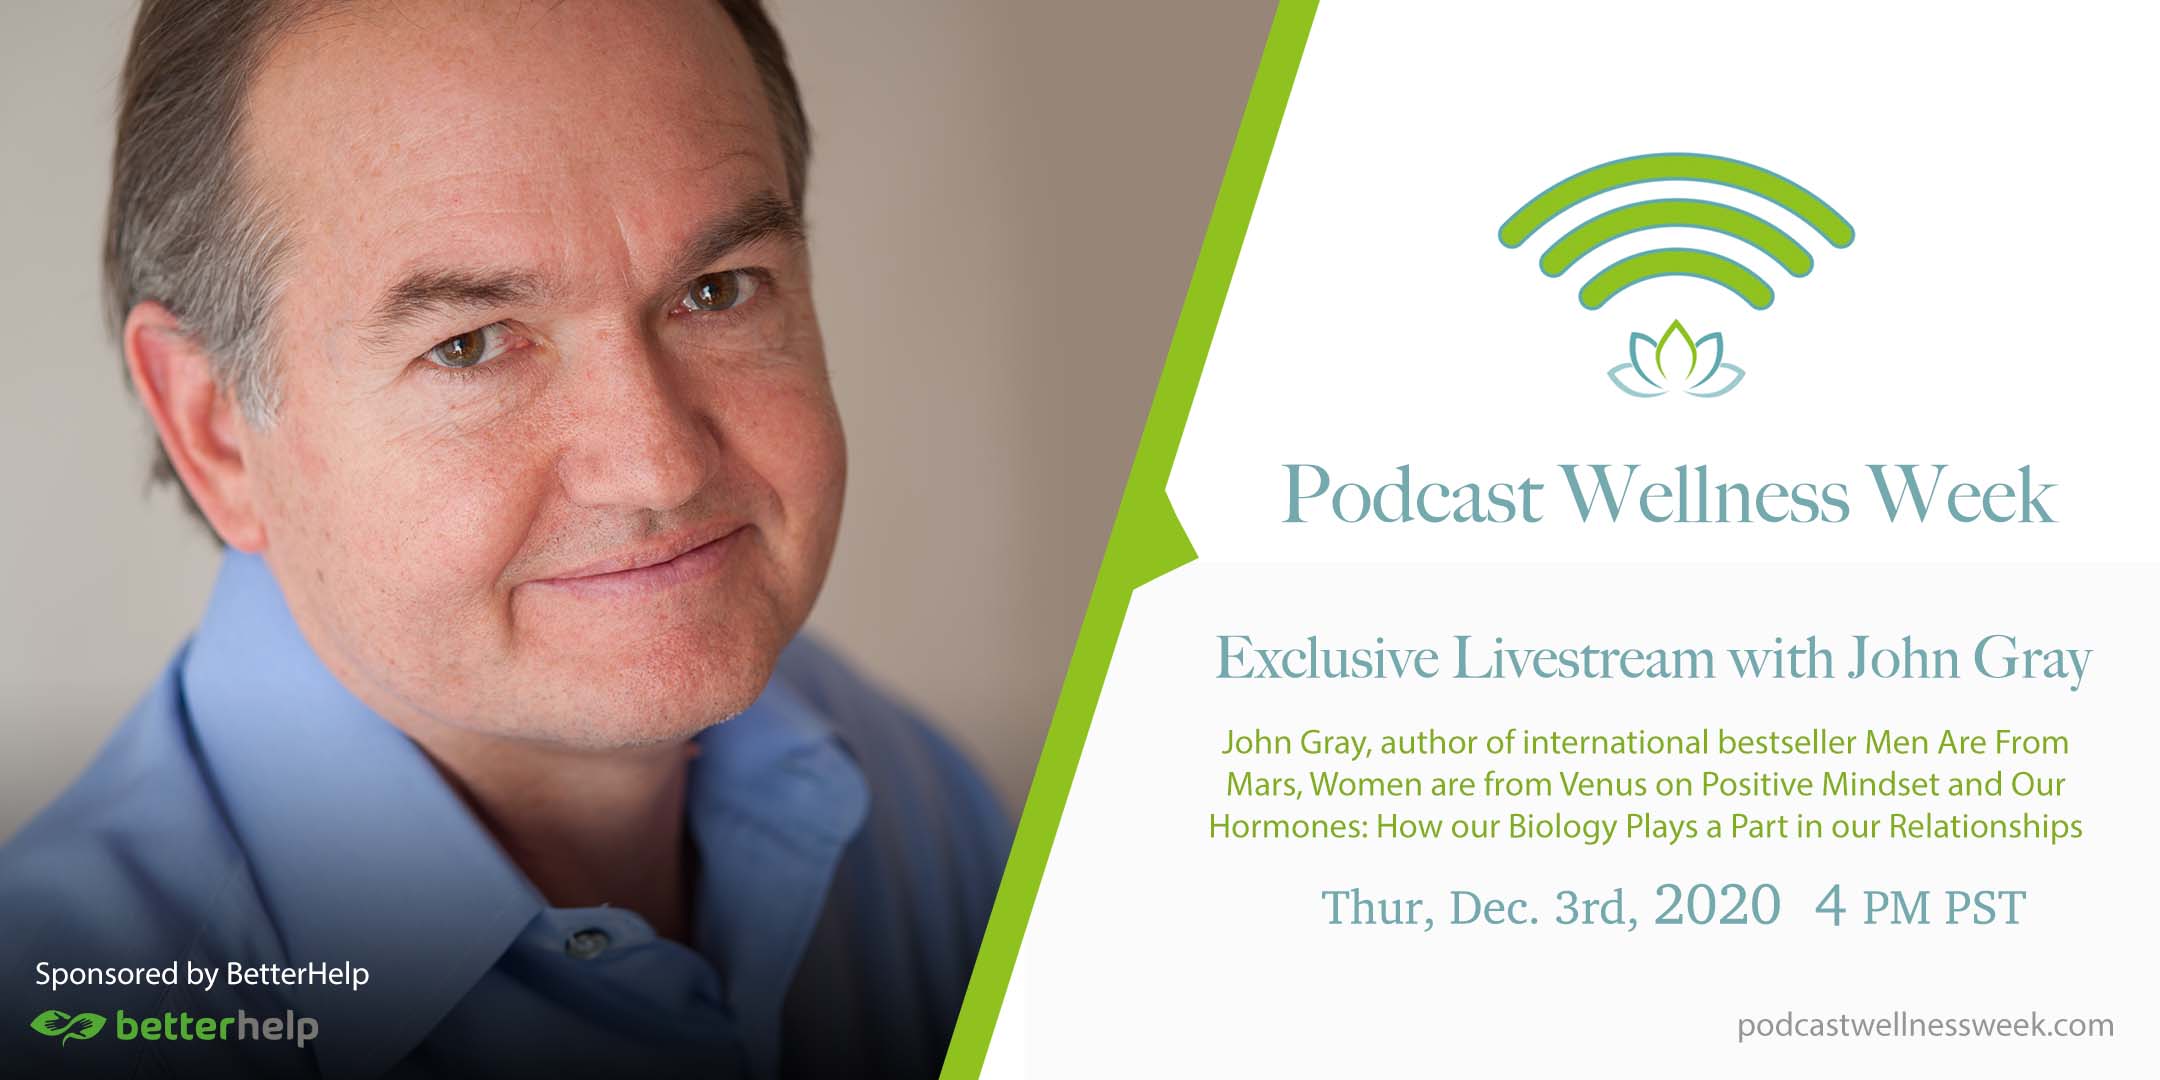 Exclusive Daily Livestream: John Gray on Positive Mindset and Our Hormones: How Our Biology Plays a Part in our Relationships